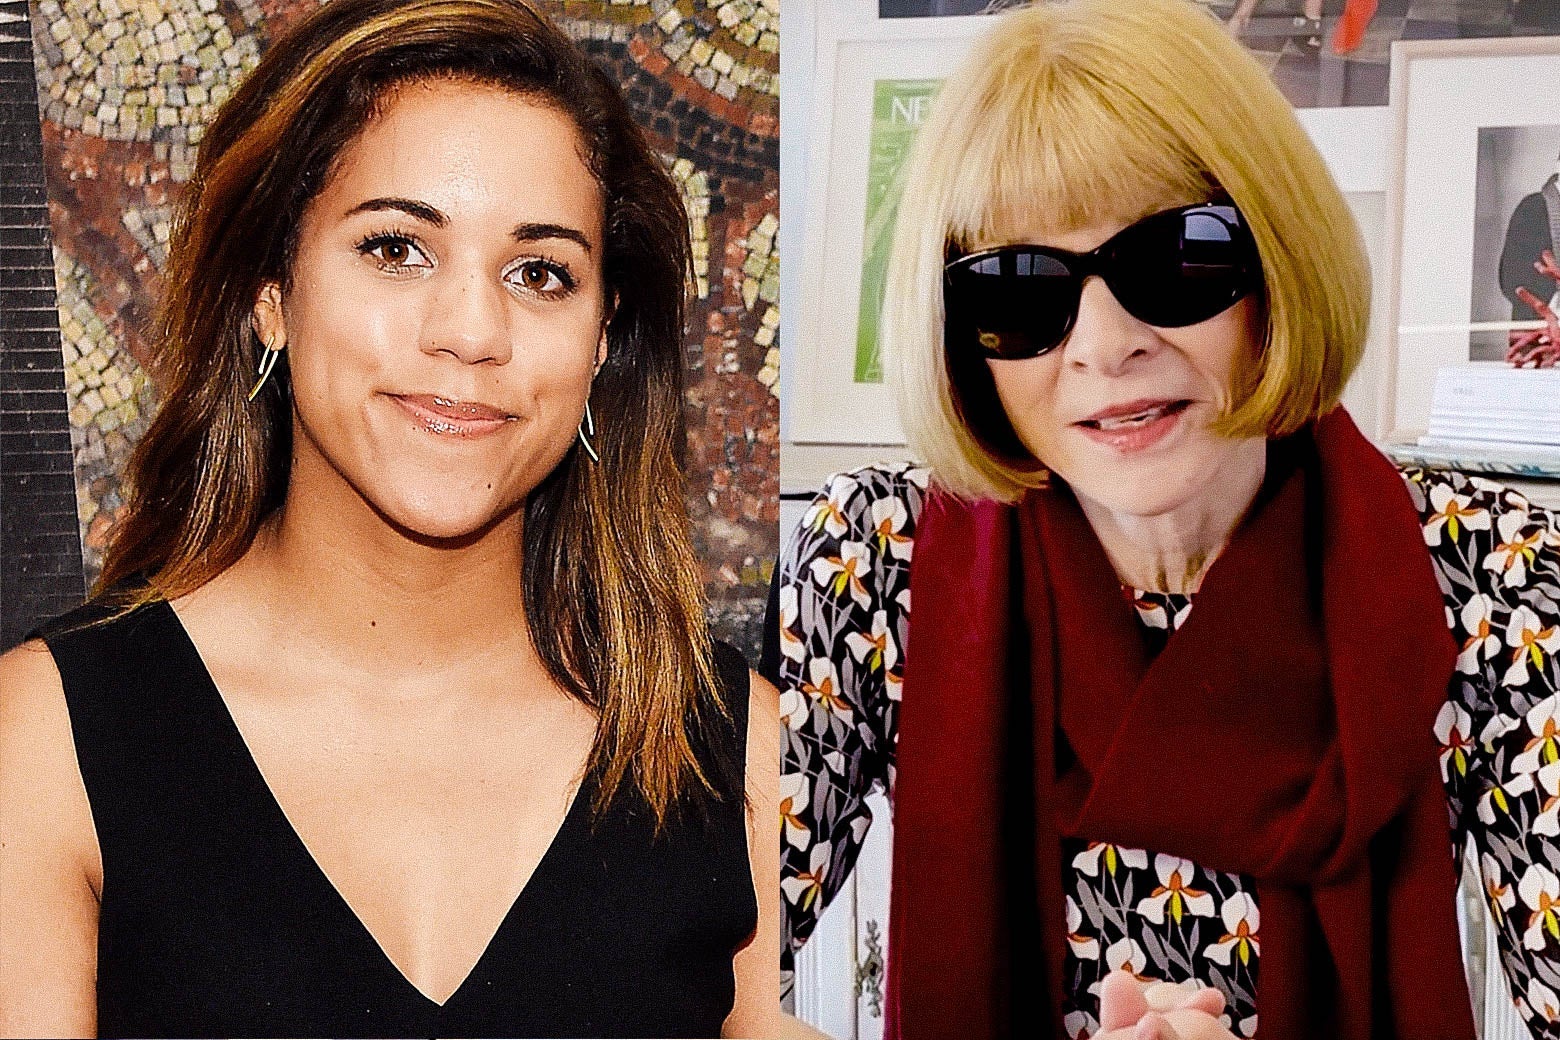 Side-by-side images of Alexi McCammond and Anna Wintour.